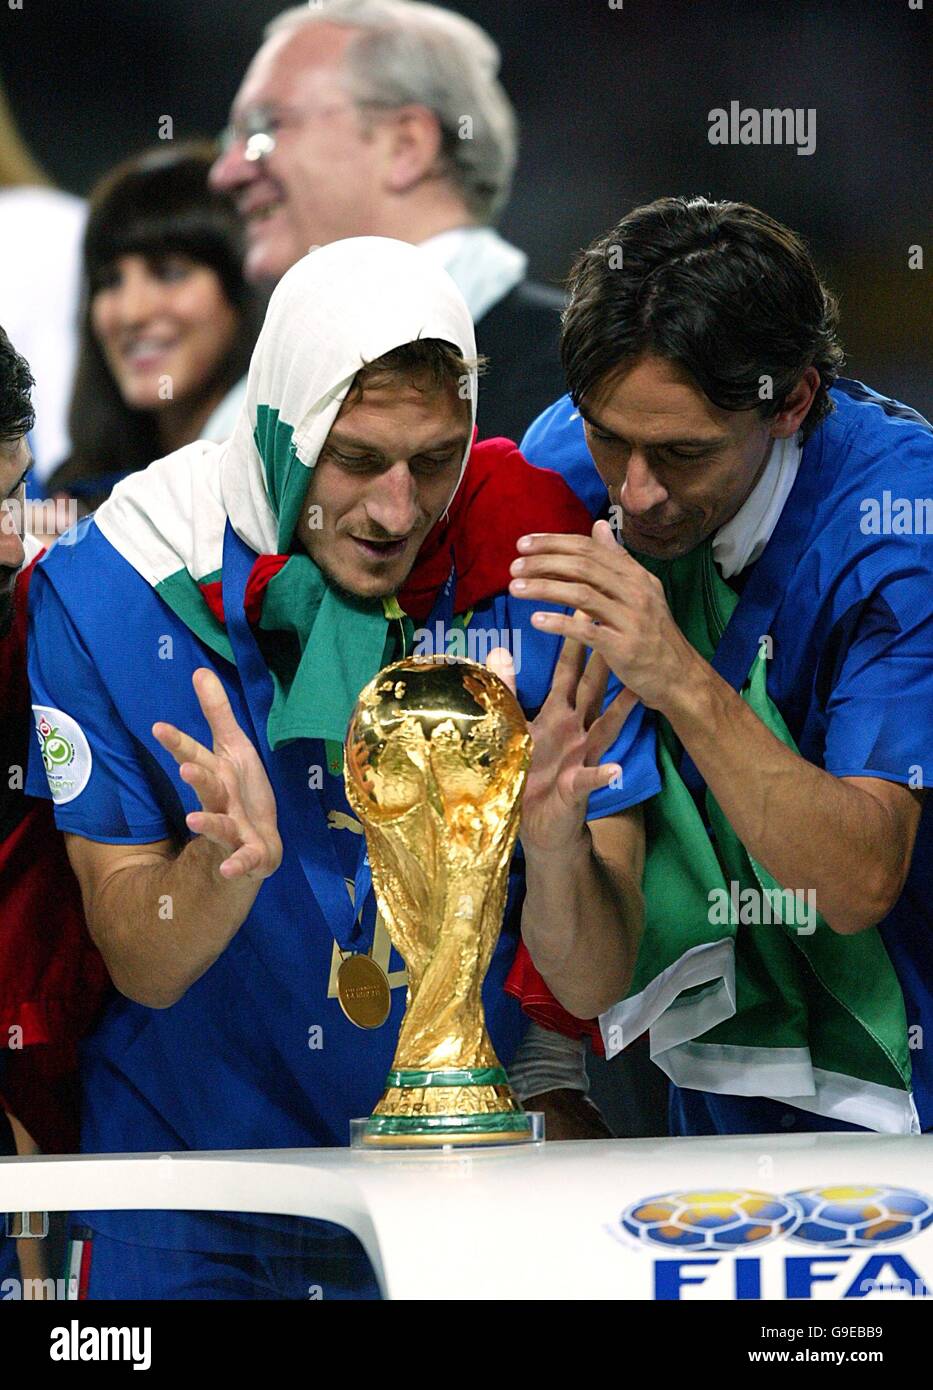 Italy's Francesco Totti and Filippo Inzaghi admire the FIFA World Cup Stock Photo